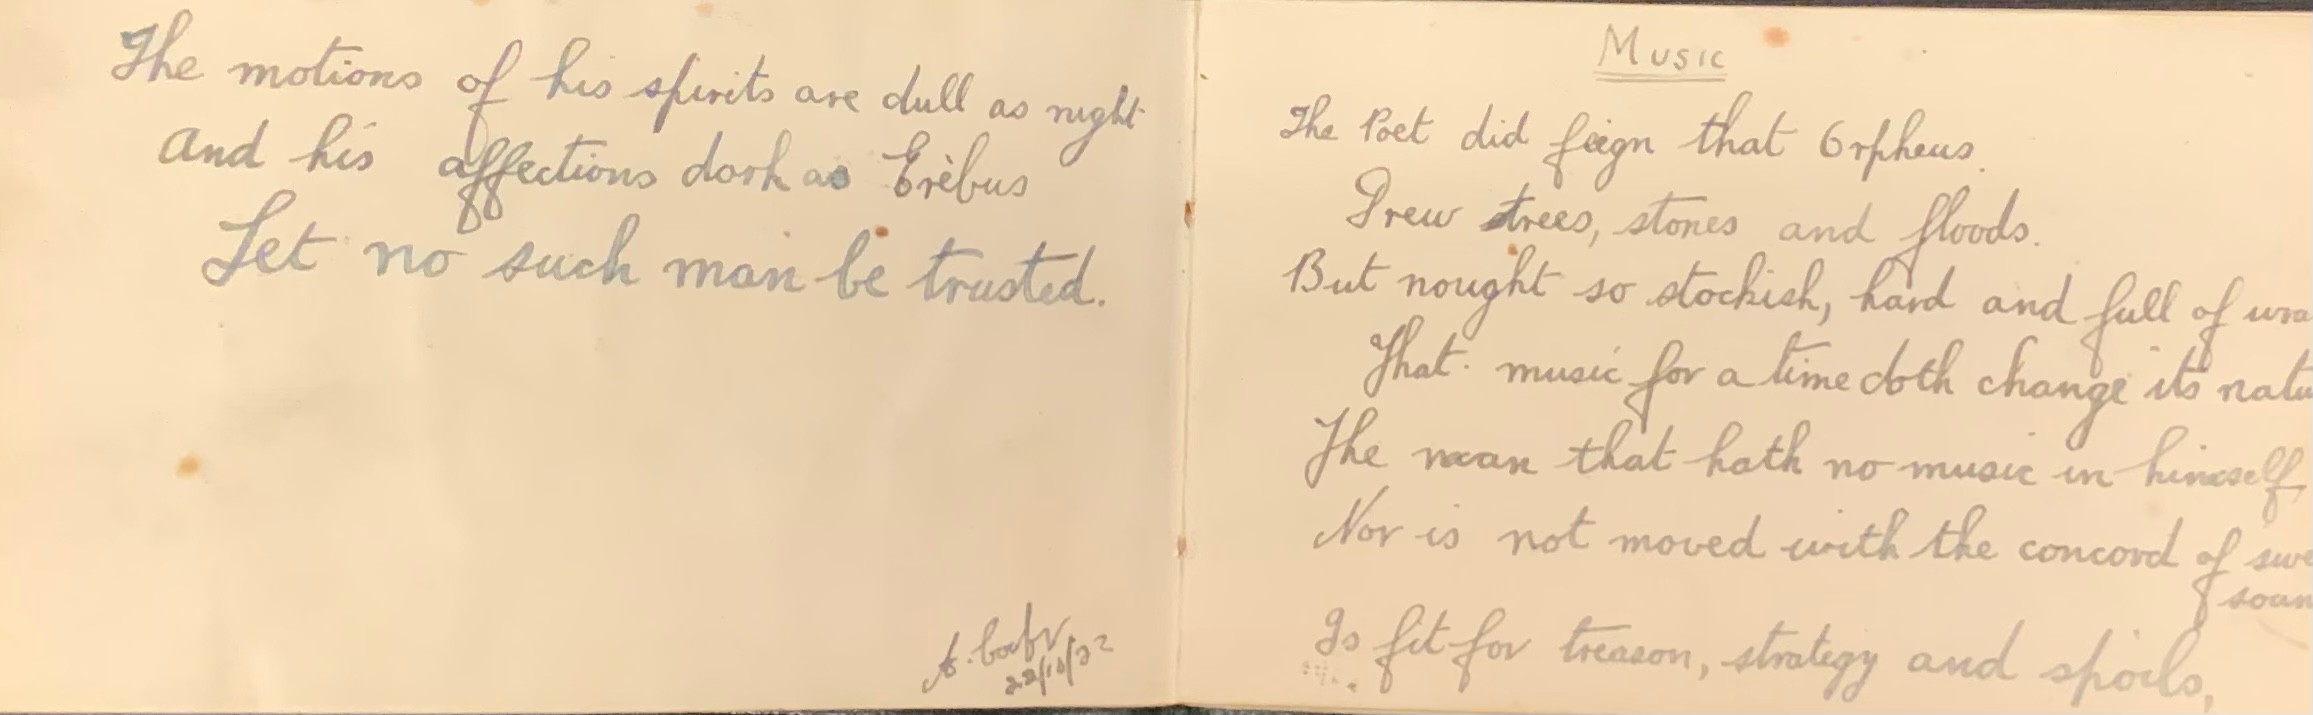 Suffragette Interest - An autograph book for Mary Emmott's (1866-1954) Political Activist, executive - Image 4 of 4